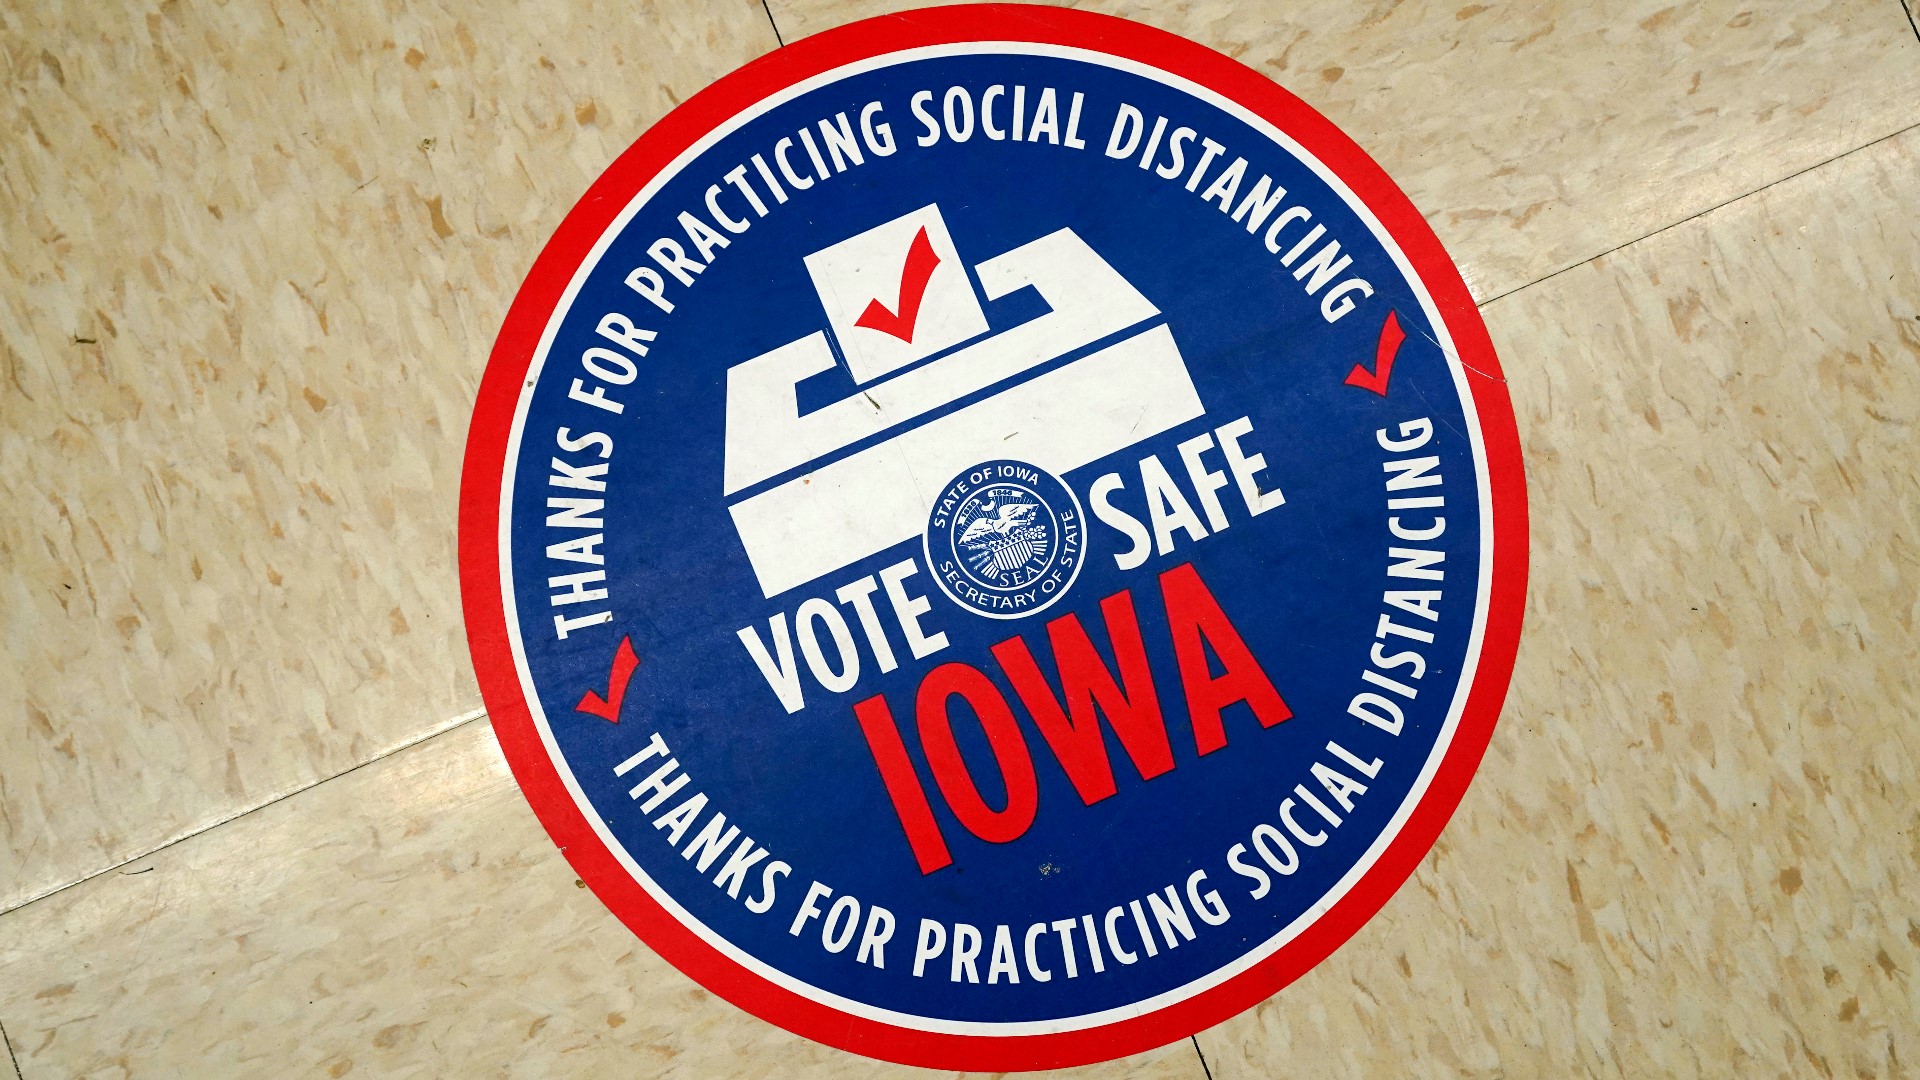 If you die after casting your ballot but before Election Day in Iowa, your vote will not count.